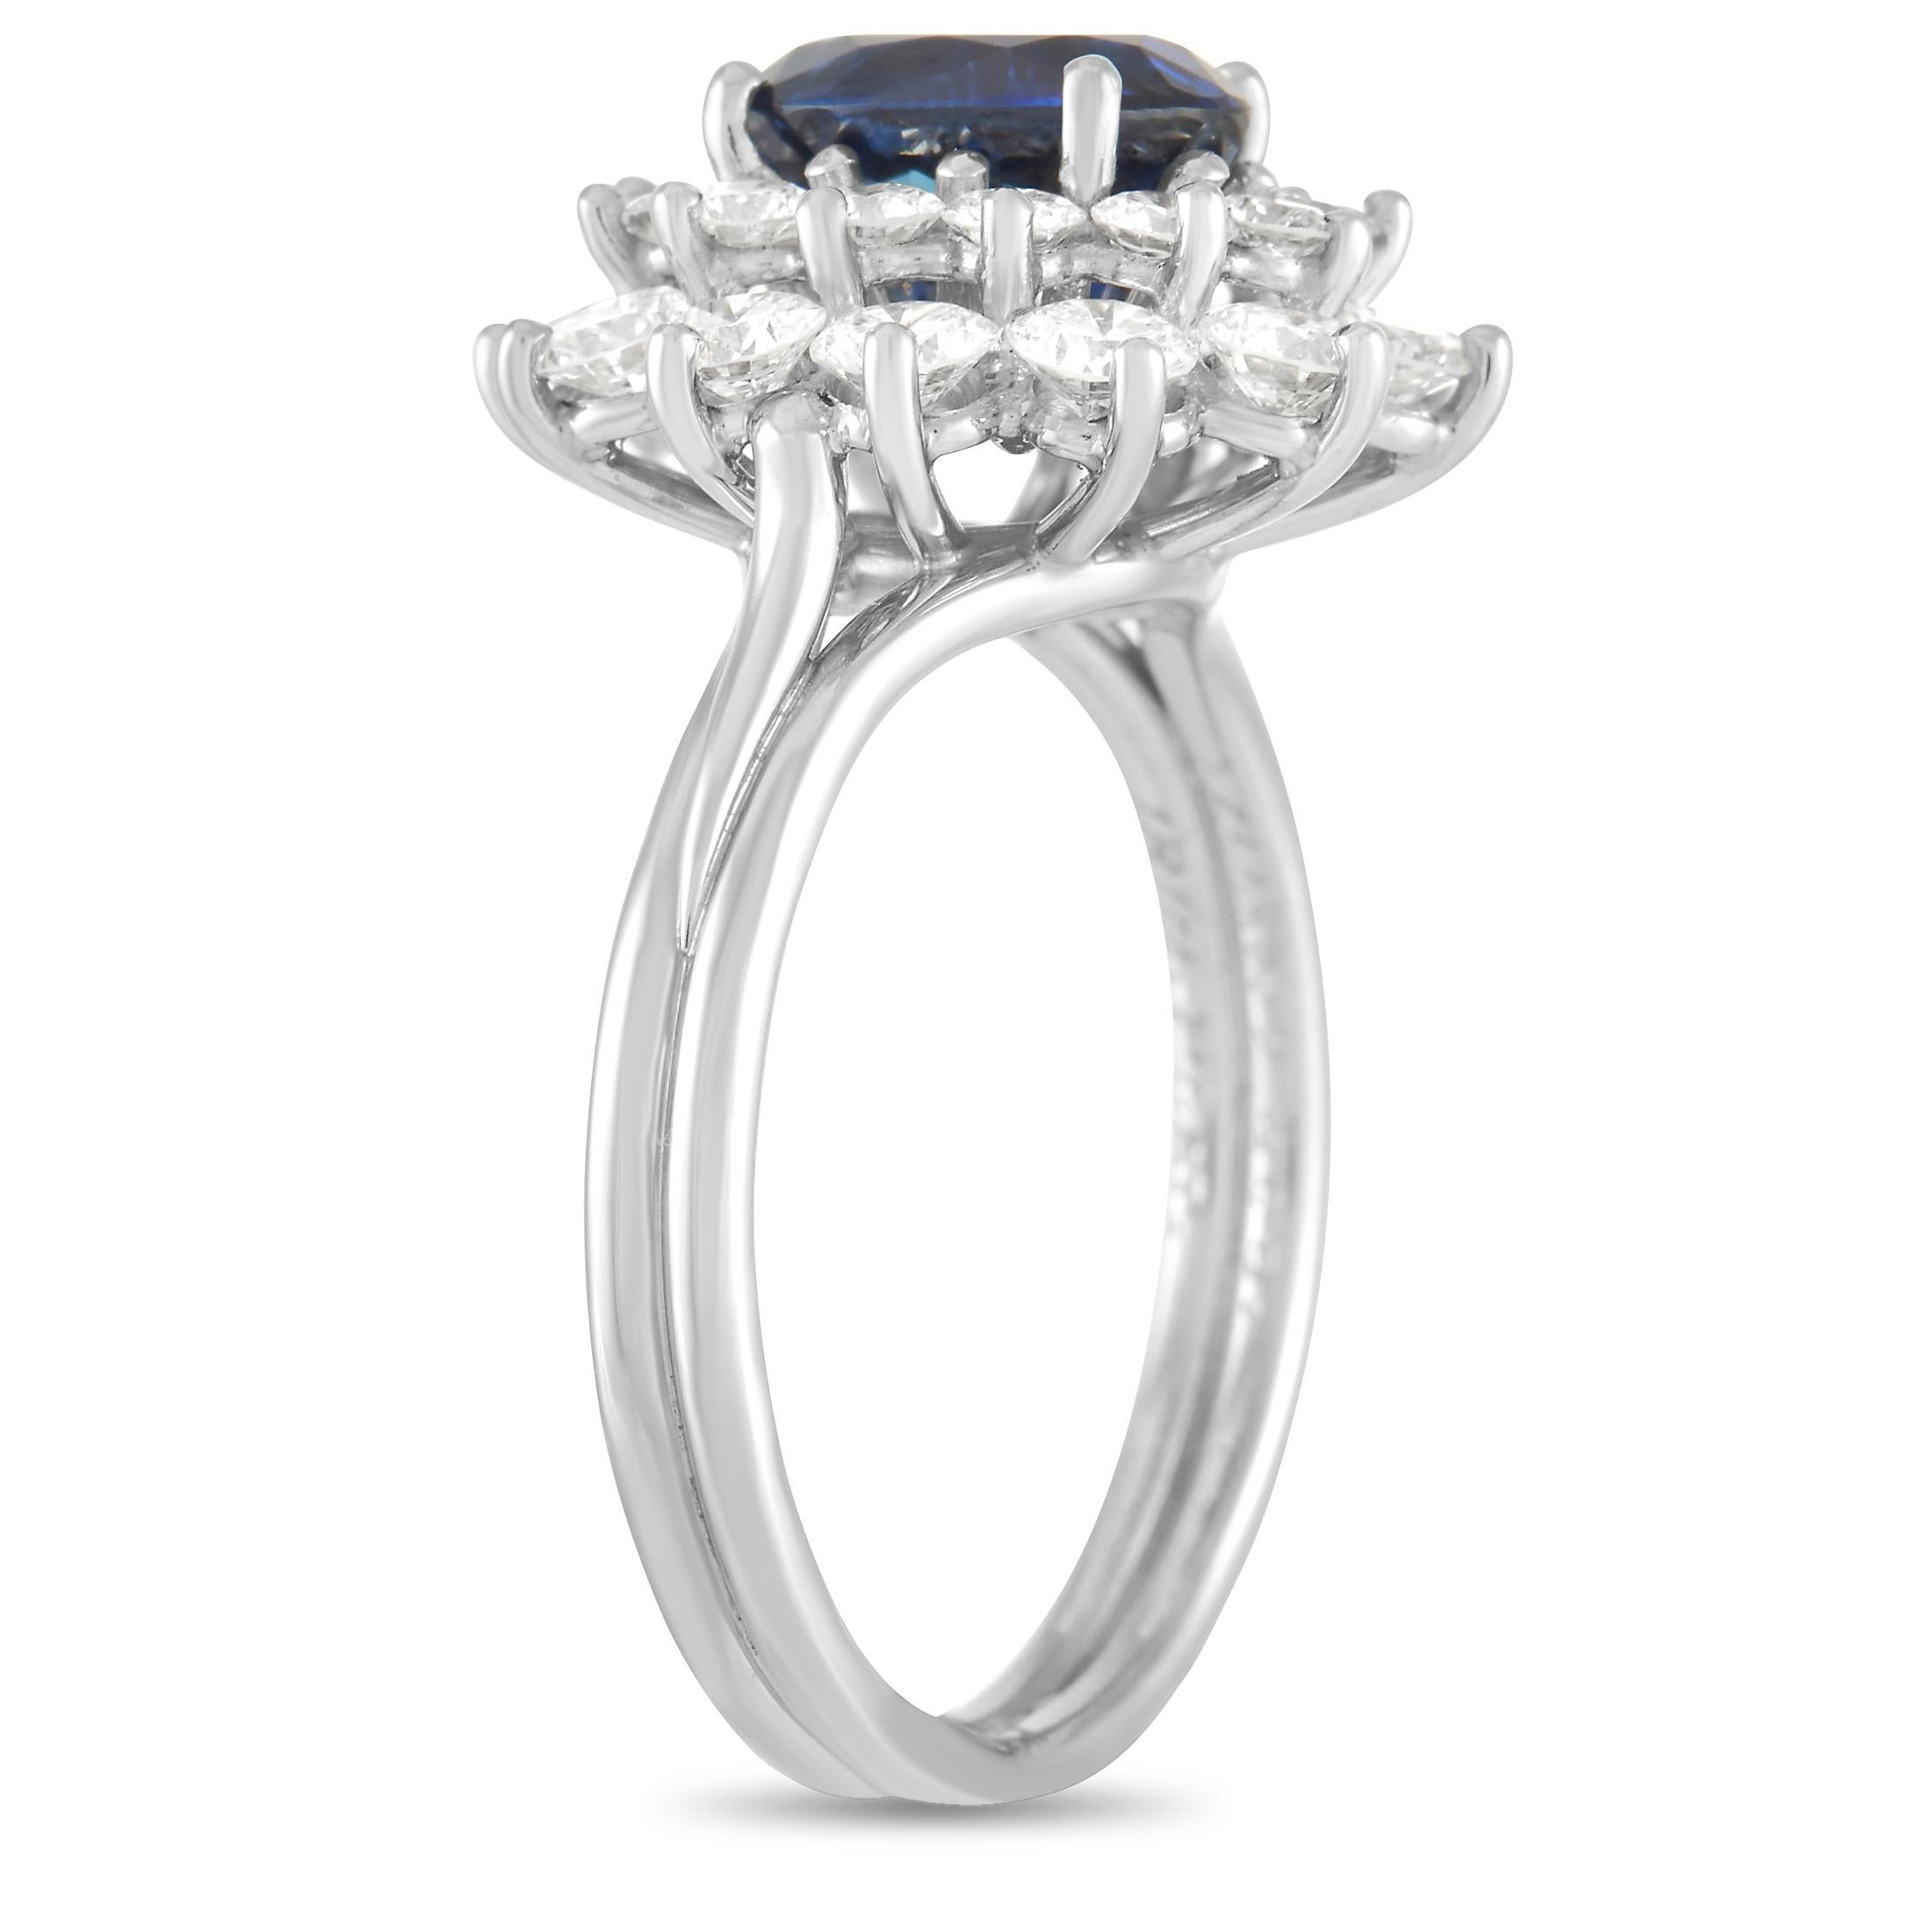 This exquisite estate ring from luxury brand Tiffany & Co. is the kind of piece that will become an instant heirloom. At the center of the platinum setting, you’ll find a deep blue 1.0 carat oval-cut sapphire. It’s surrounded by a double halo of